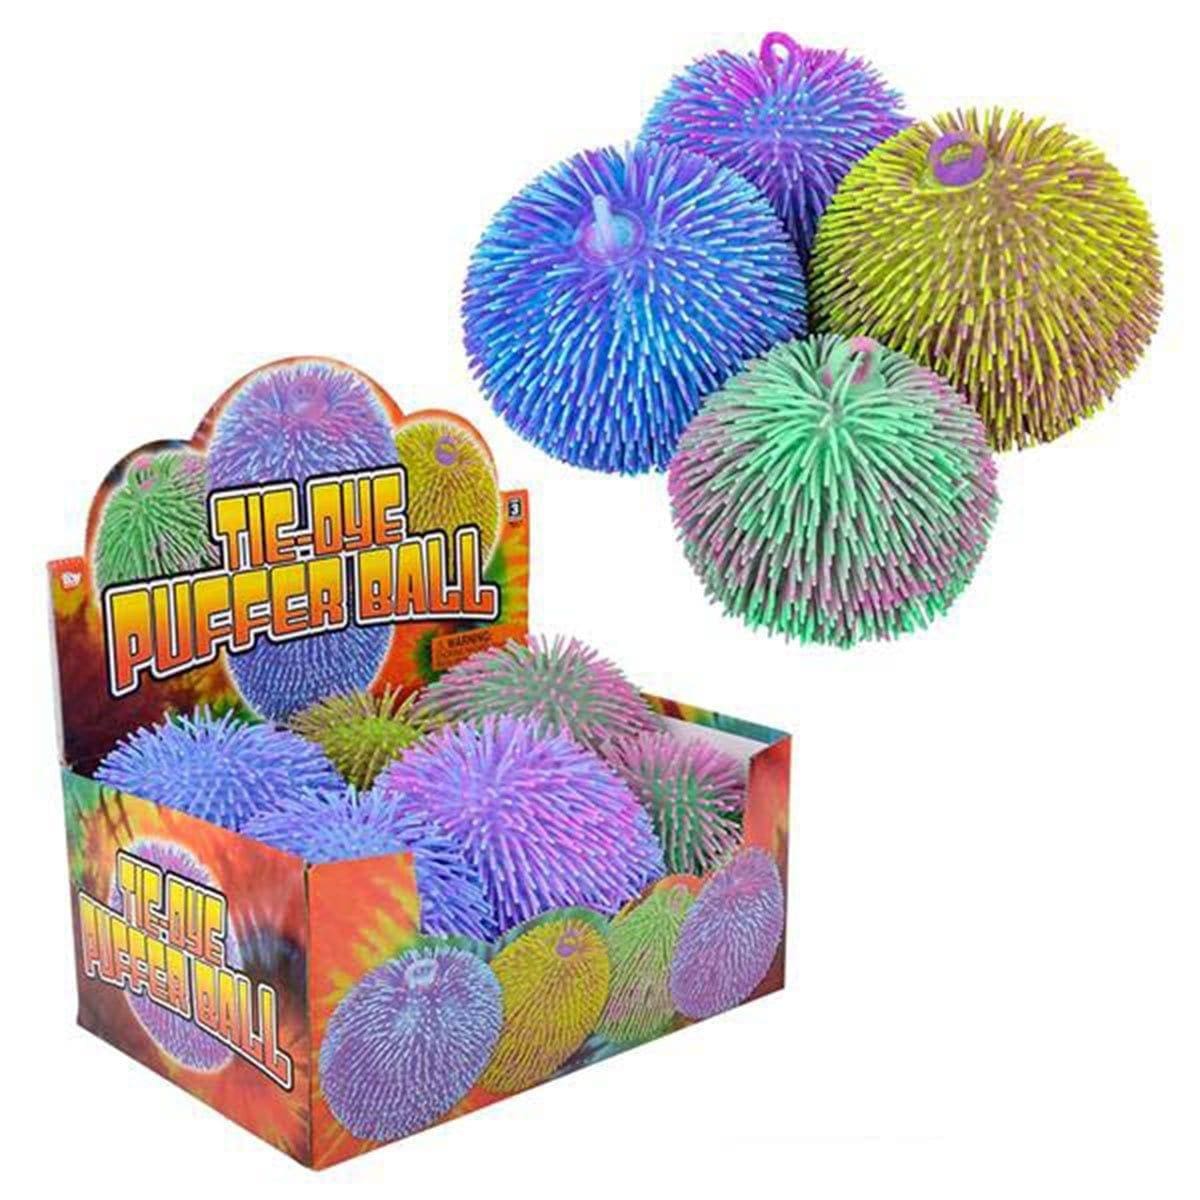 Buy Novelties Puffer Ball Tie-Dye sold at Party Expert